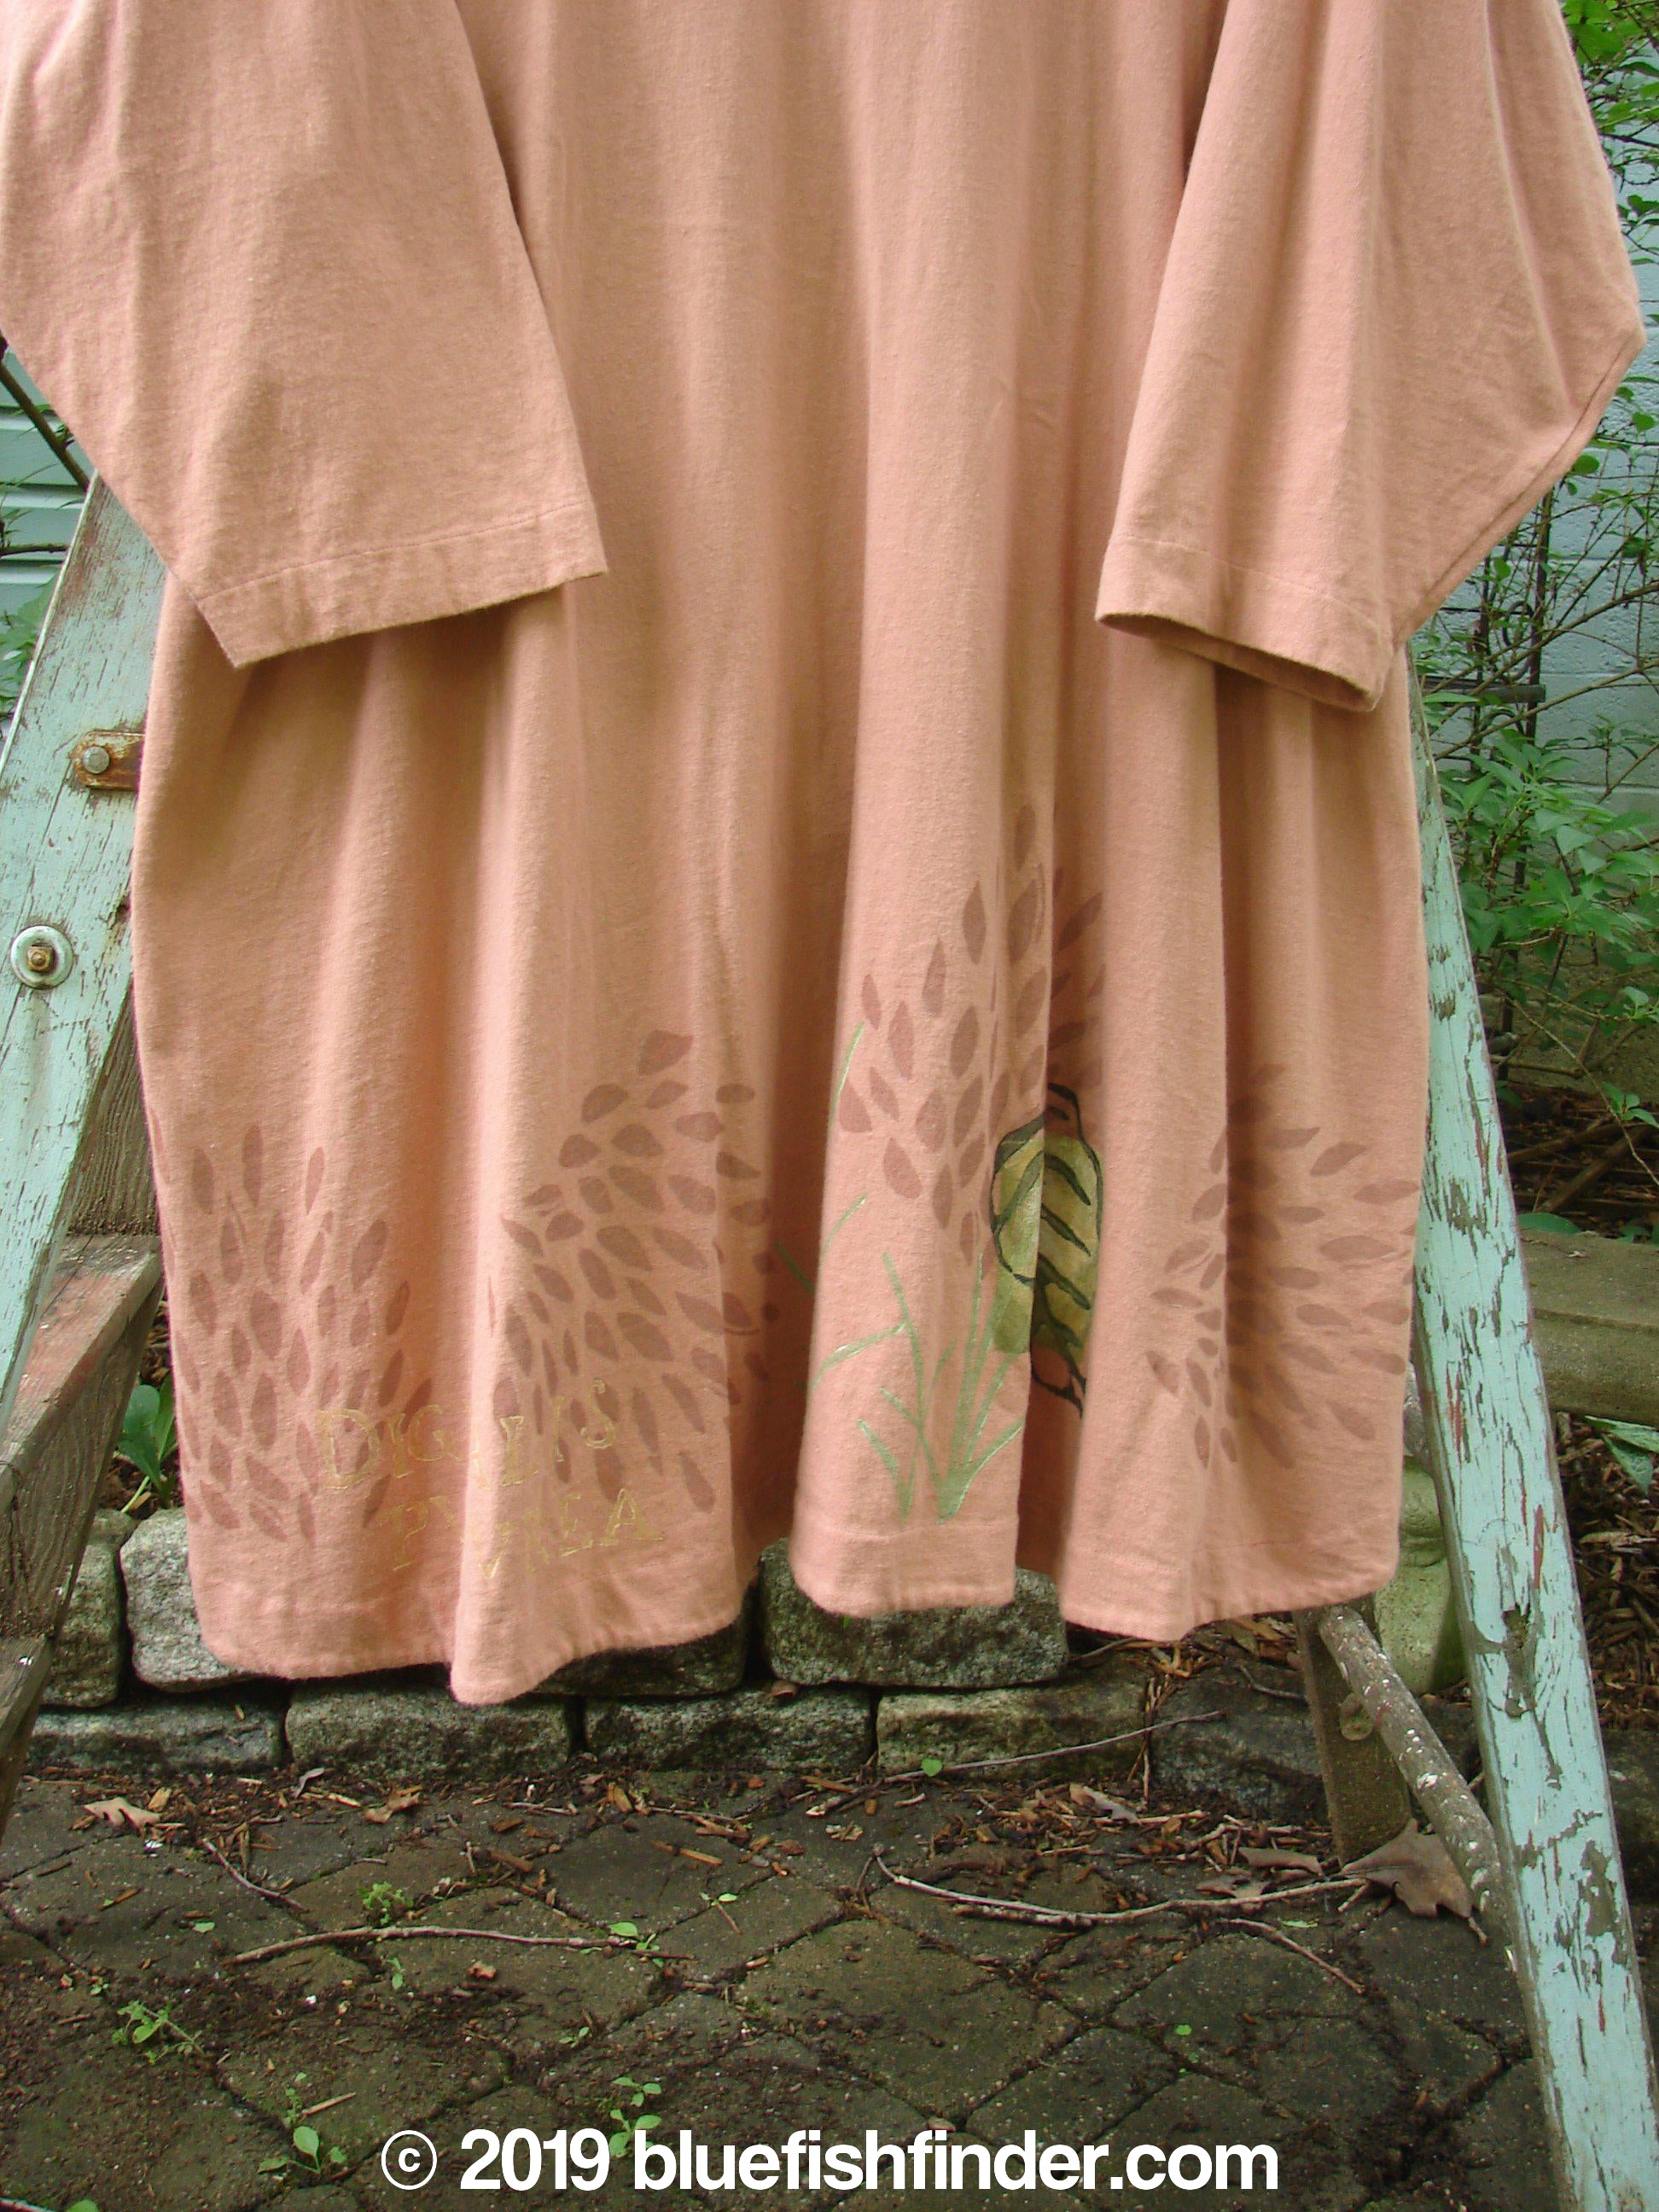 1998 Botanicals Bell Flower Top Magnolia Size 2: A pink shirt on a ladder, featuring a belled A-line shape, sectional panels, and a Blue Fish signature patch.